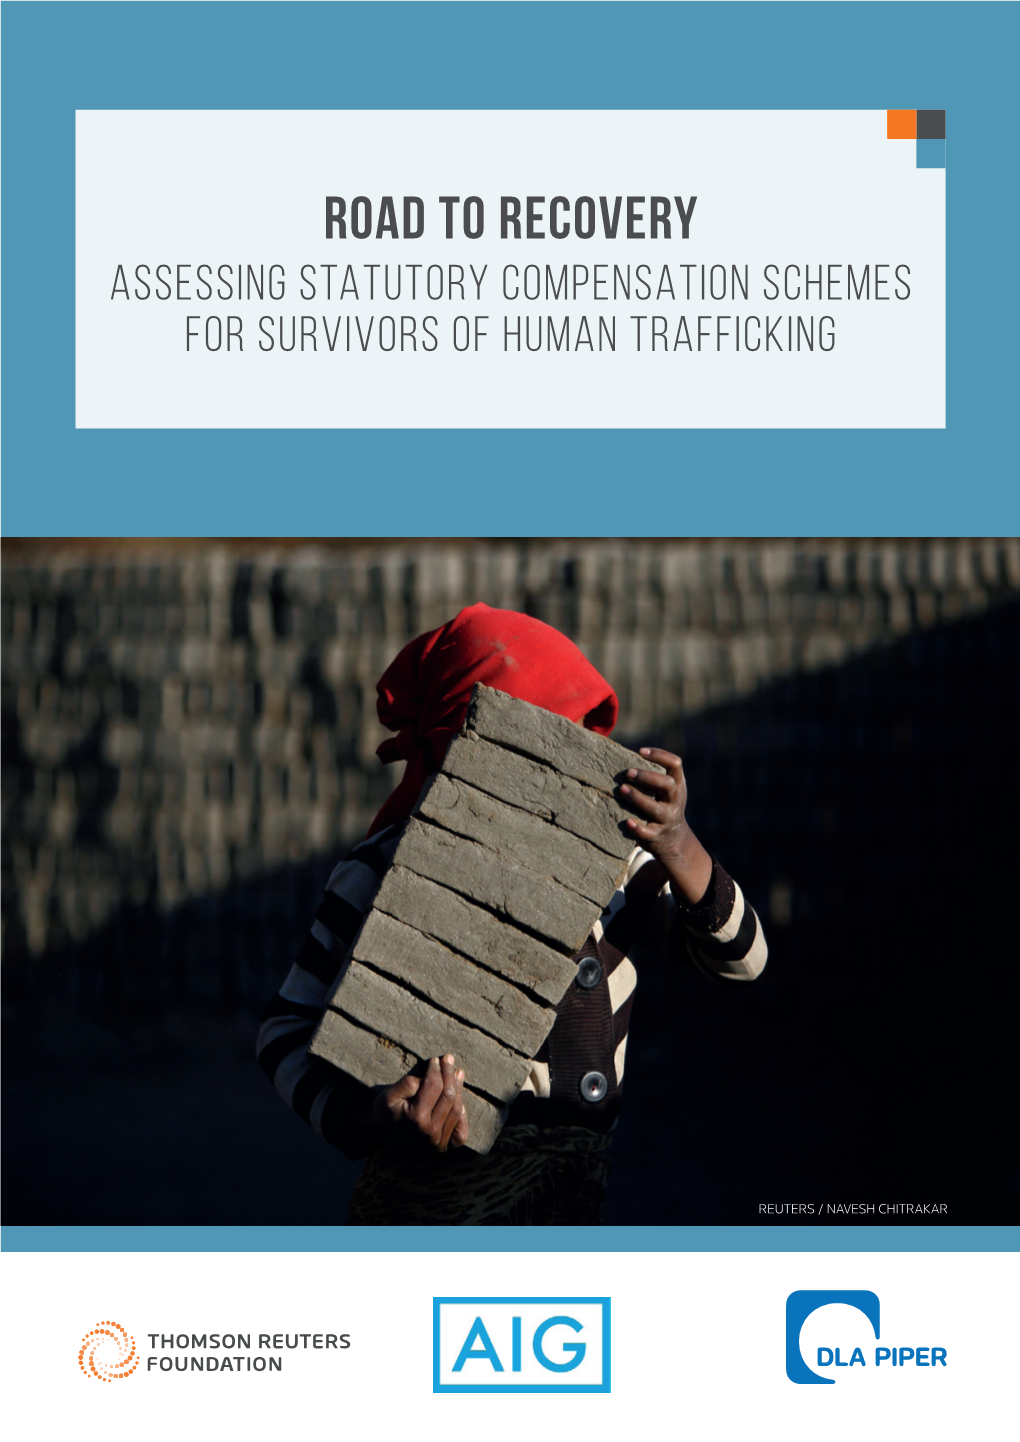 Road to Recovery Assessing Statutory Compensation Schemes for Survivors of Human Trafficking